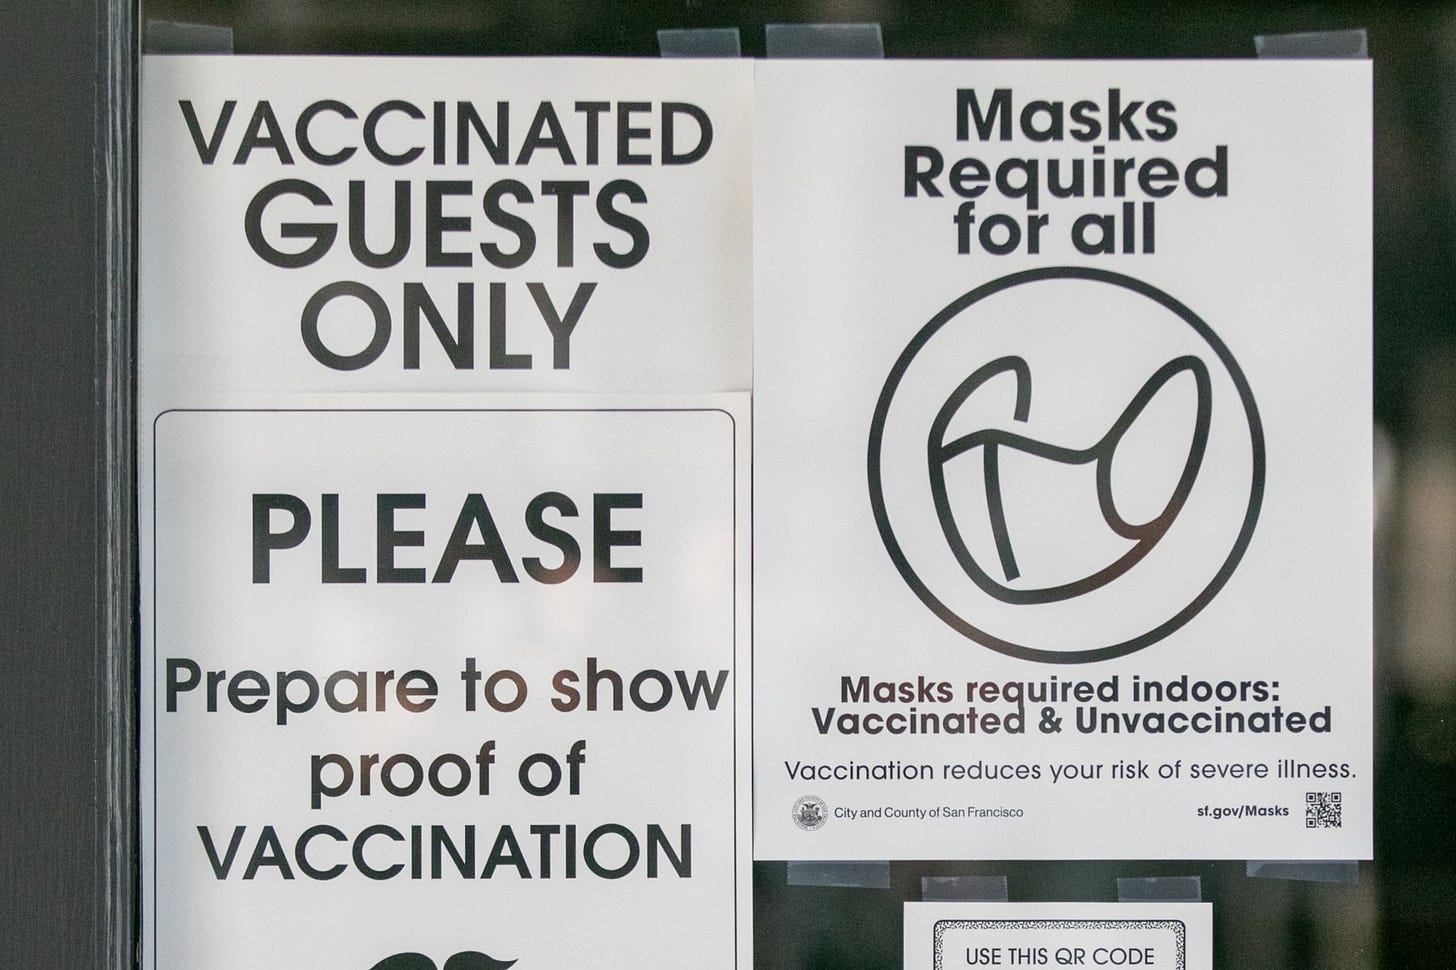 Where you must show proof of vaccination in San Francisco beginning Friday